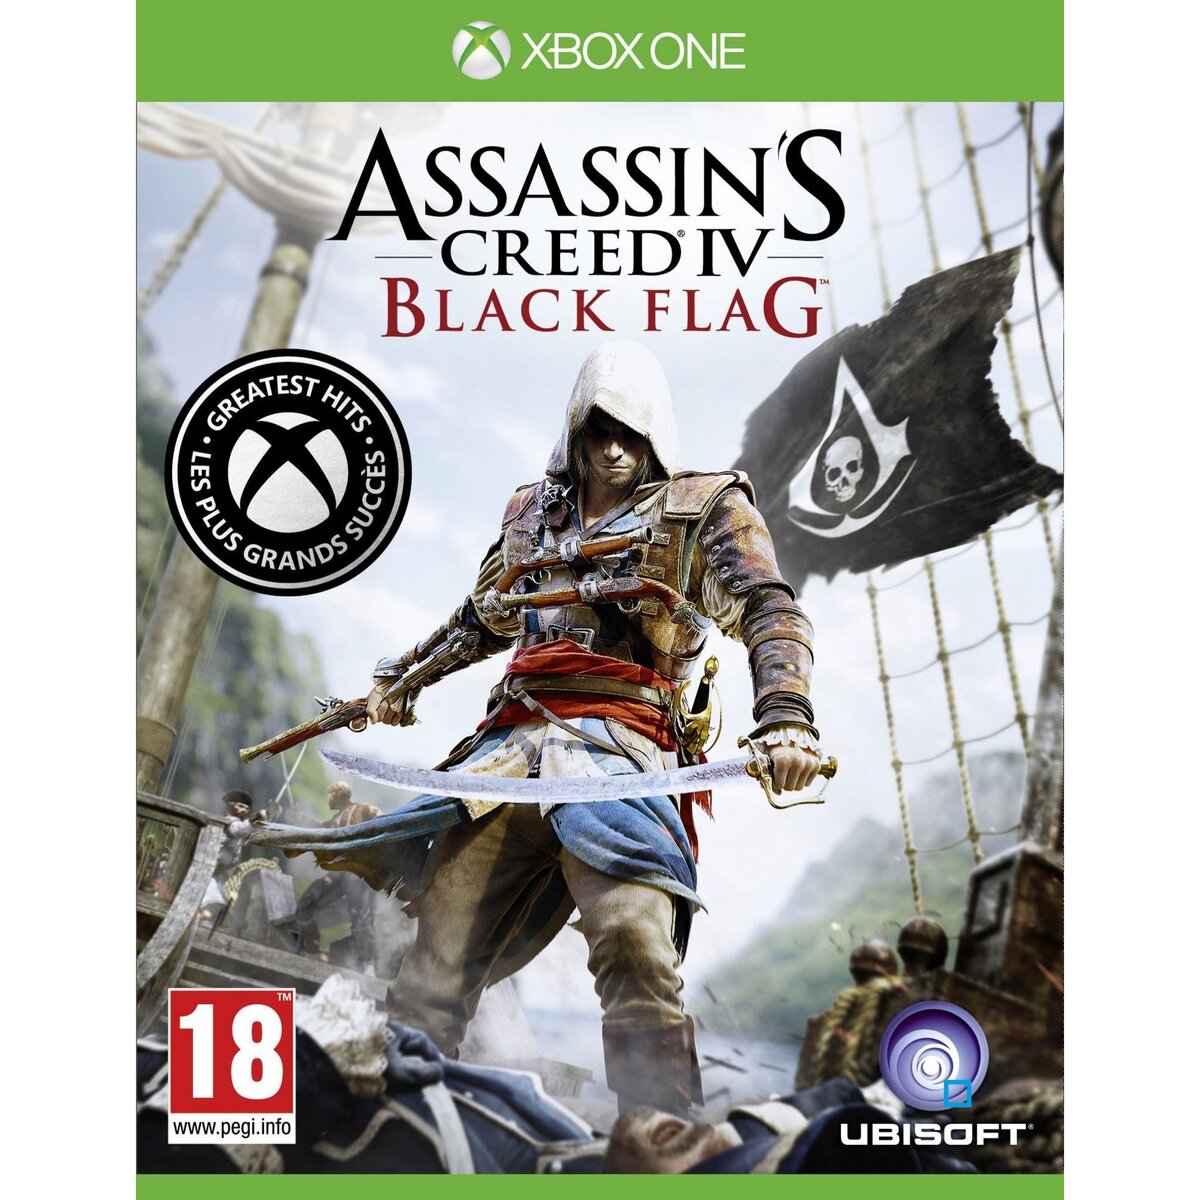 Assassin's Creed 4 Black flag Xbox One